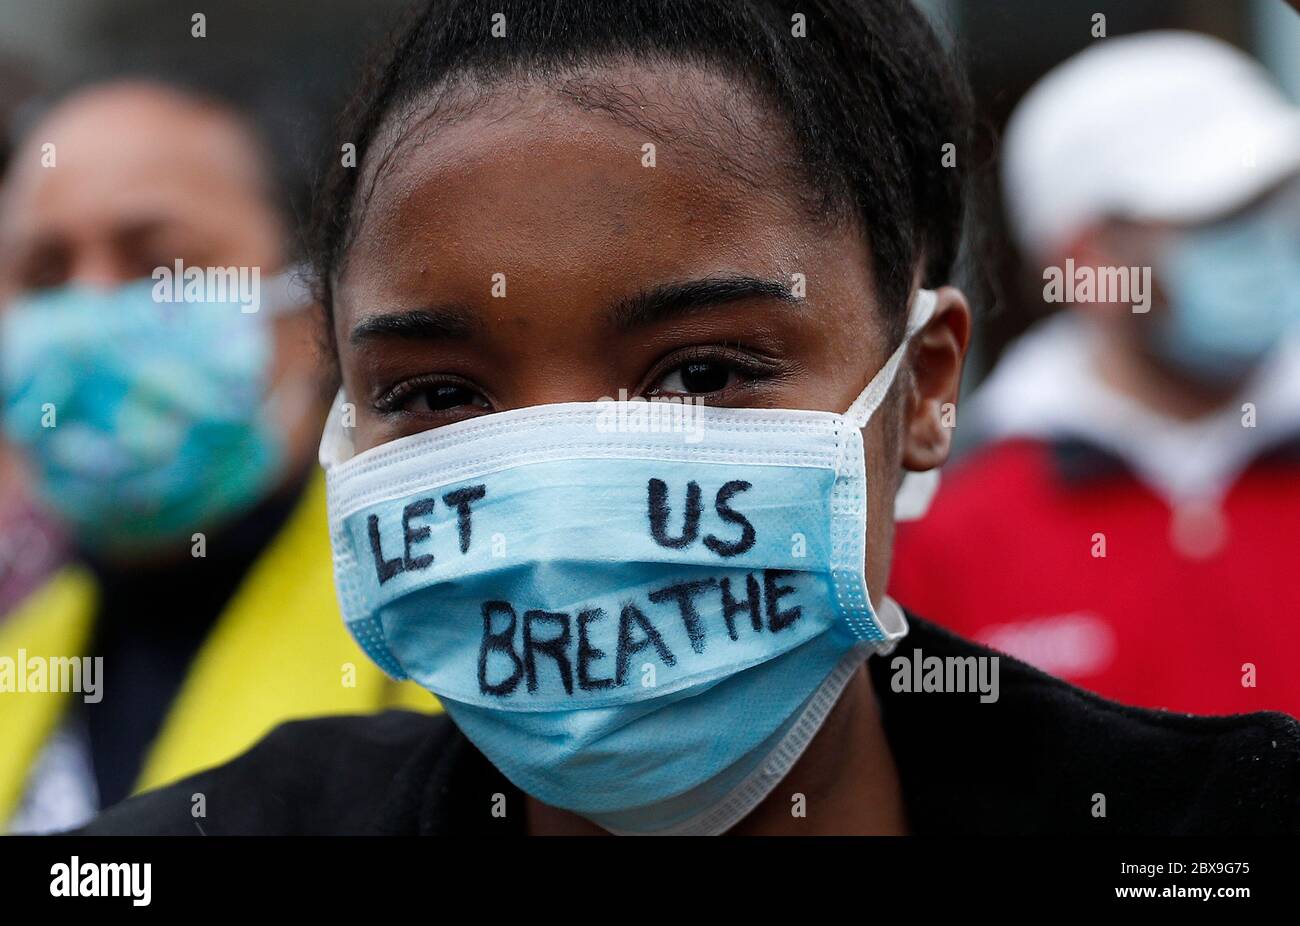 Leicester, Leicestershire, UK. 6th June 2020. A masked protester attends a 'Black lives matter' demonstration following the death of American George Floyd while in the custody of Minneapolis police. Credit Darren Staples/Alamy Live News. Stock Photo